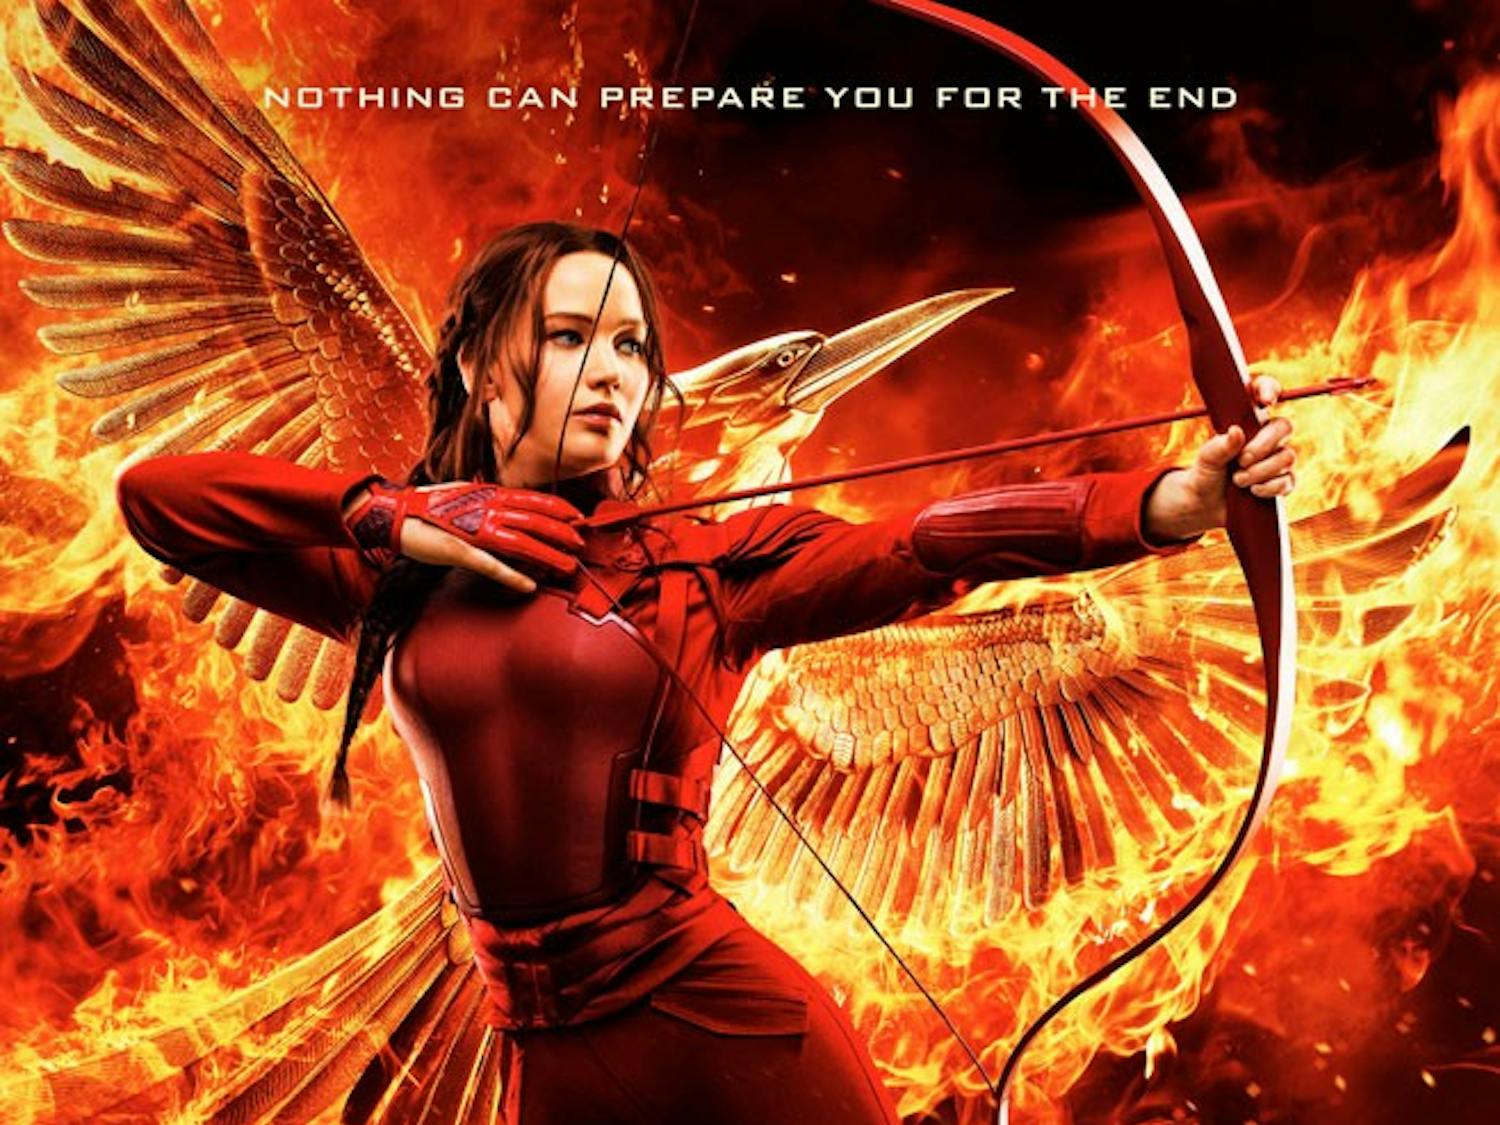 A story of emotional twists and turns, “The Hunger Games: Mockingjay Part 2” is dark and morbid but somehow ends optimistically with Katniss’s head held high.